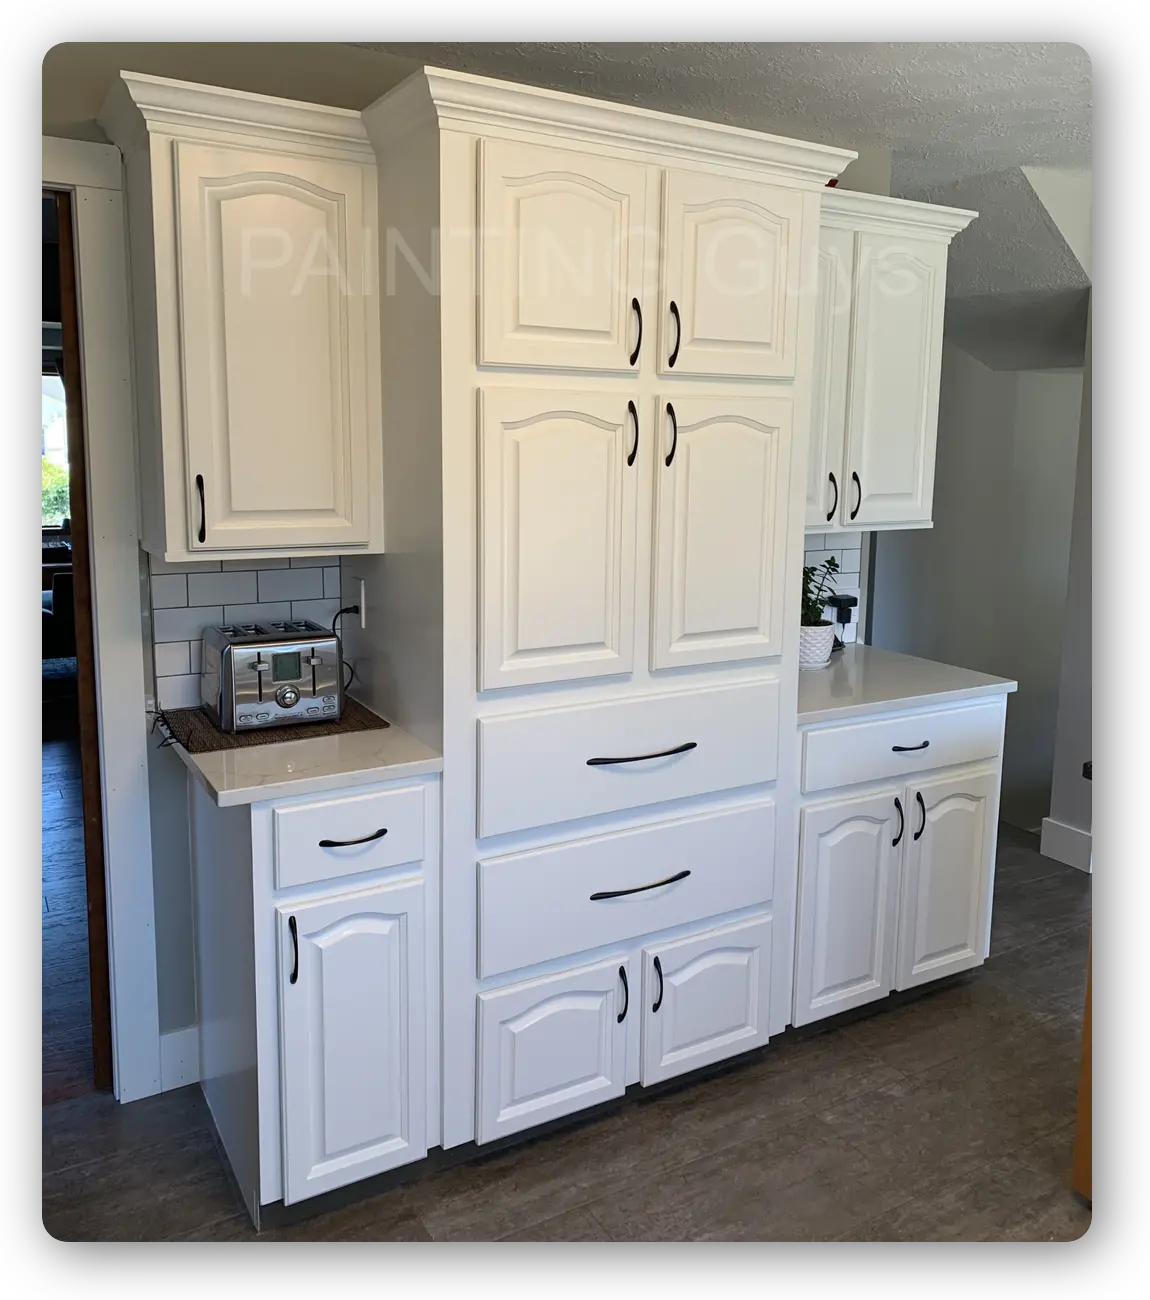 Oak Cabinets painting in cloud white